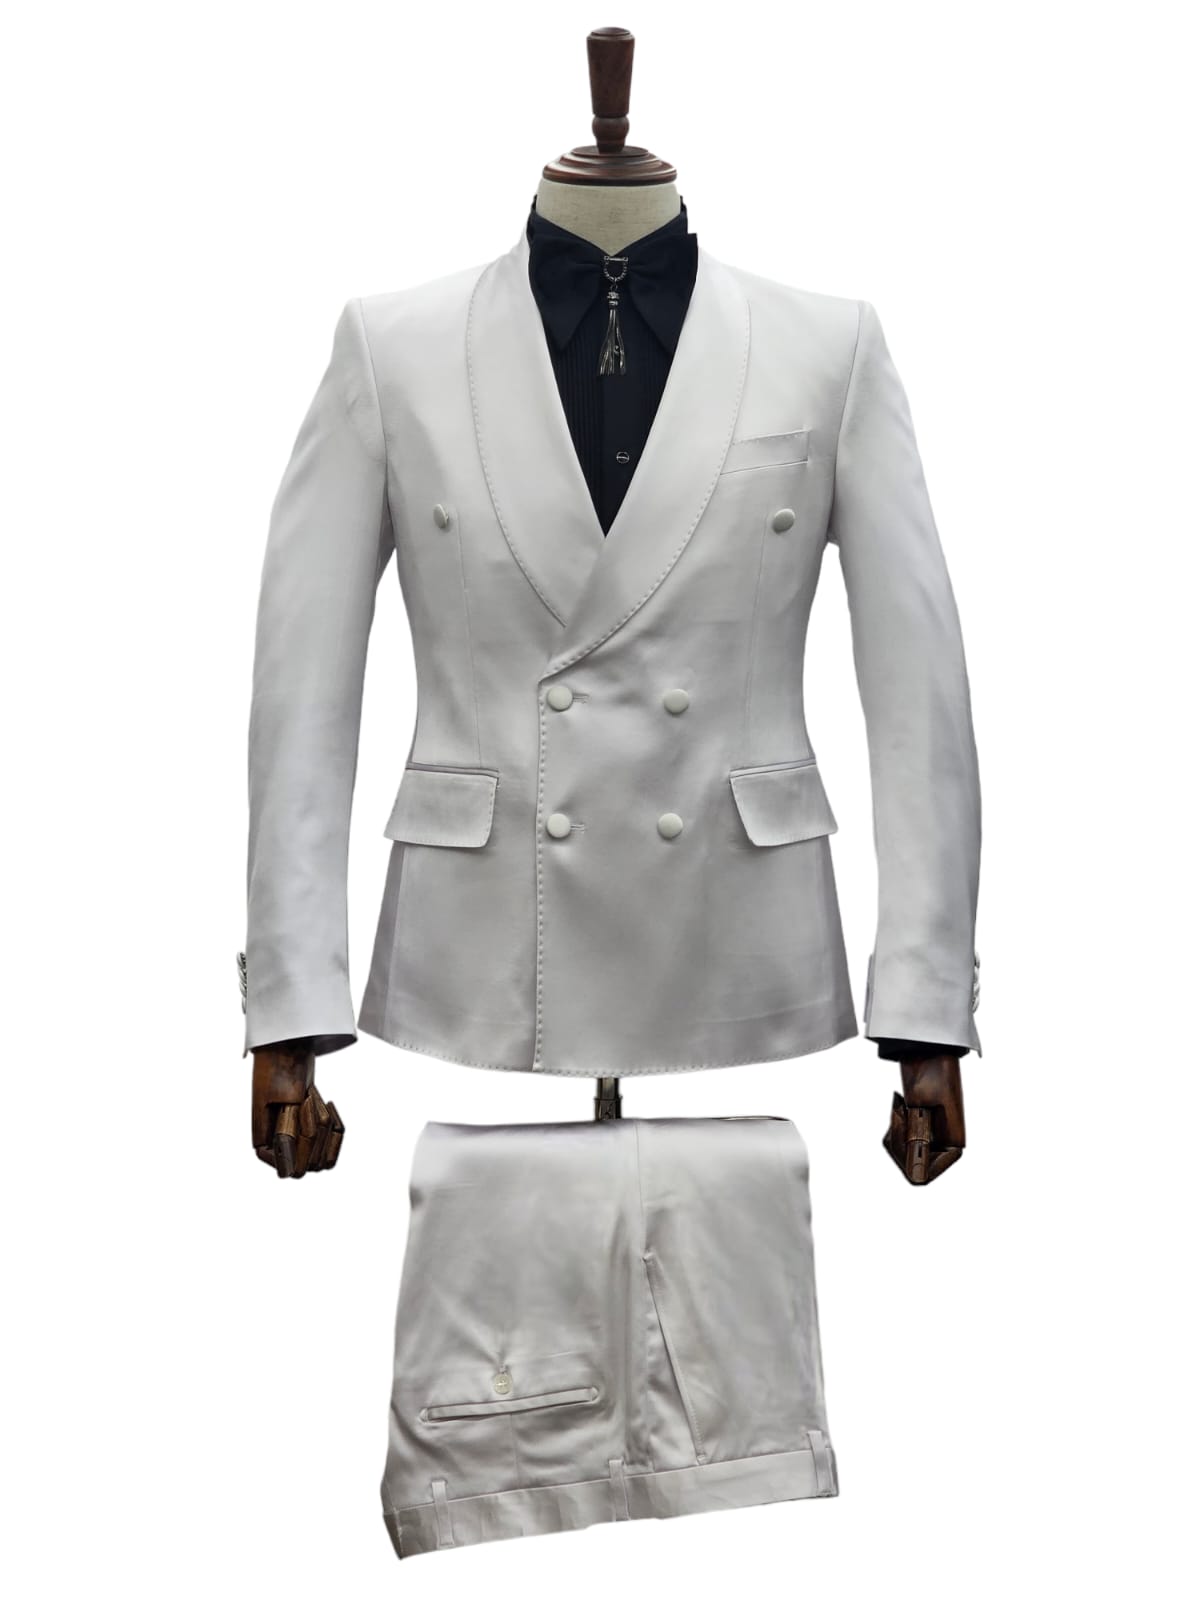 KCT Menswear White Slim Fit Double Breasted Sui